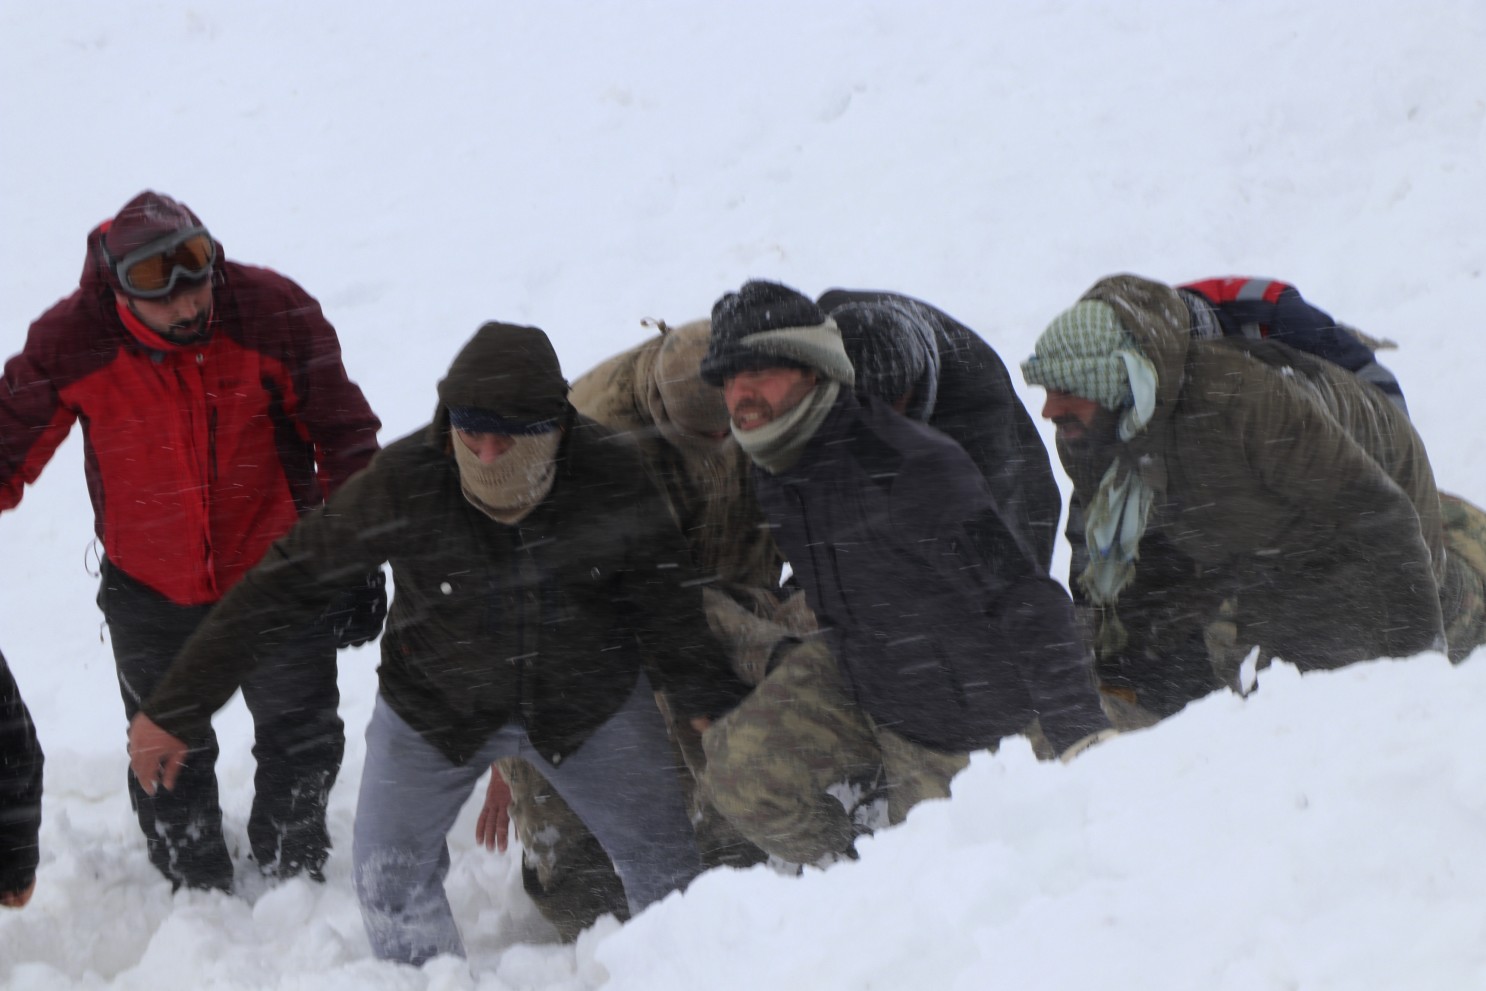 Turkey avalanche rescue operation put on hold by government